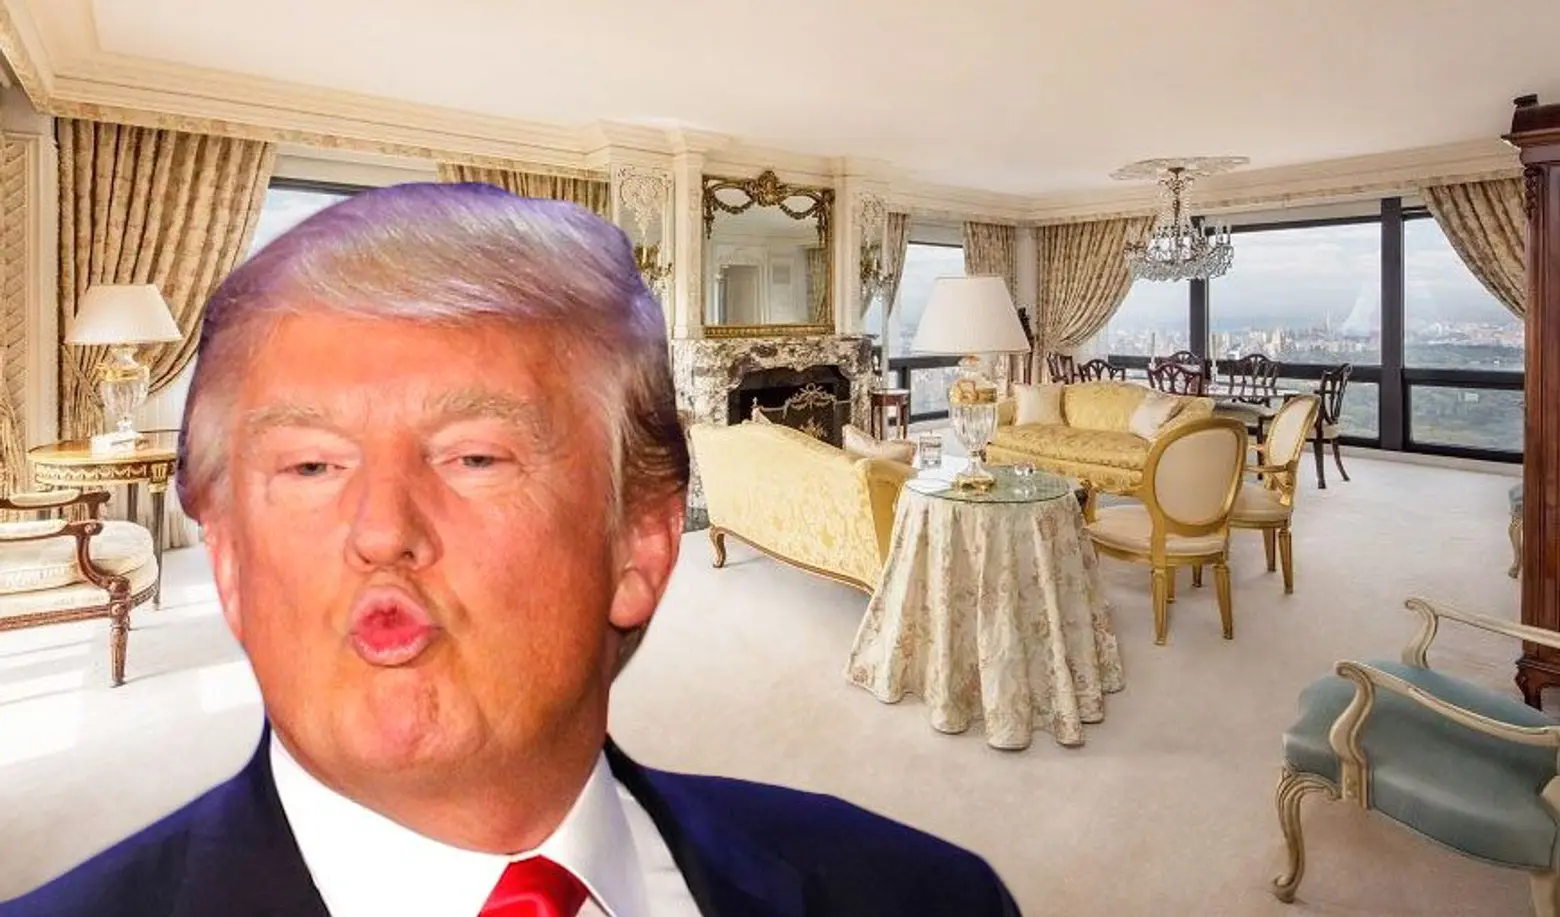 Don’t miss your $23M chance to be Donald Trump’s downstairs neighbor